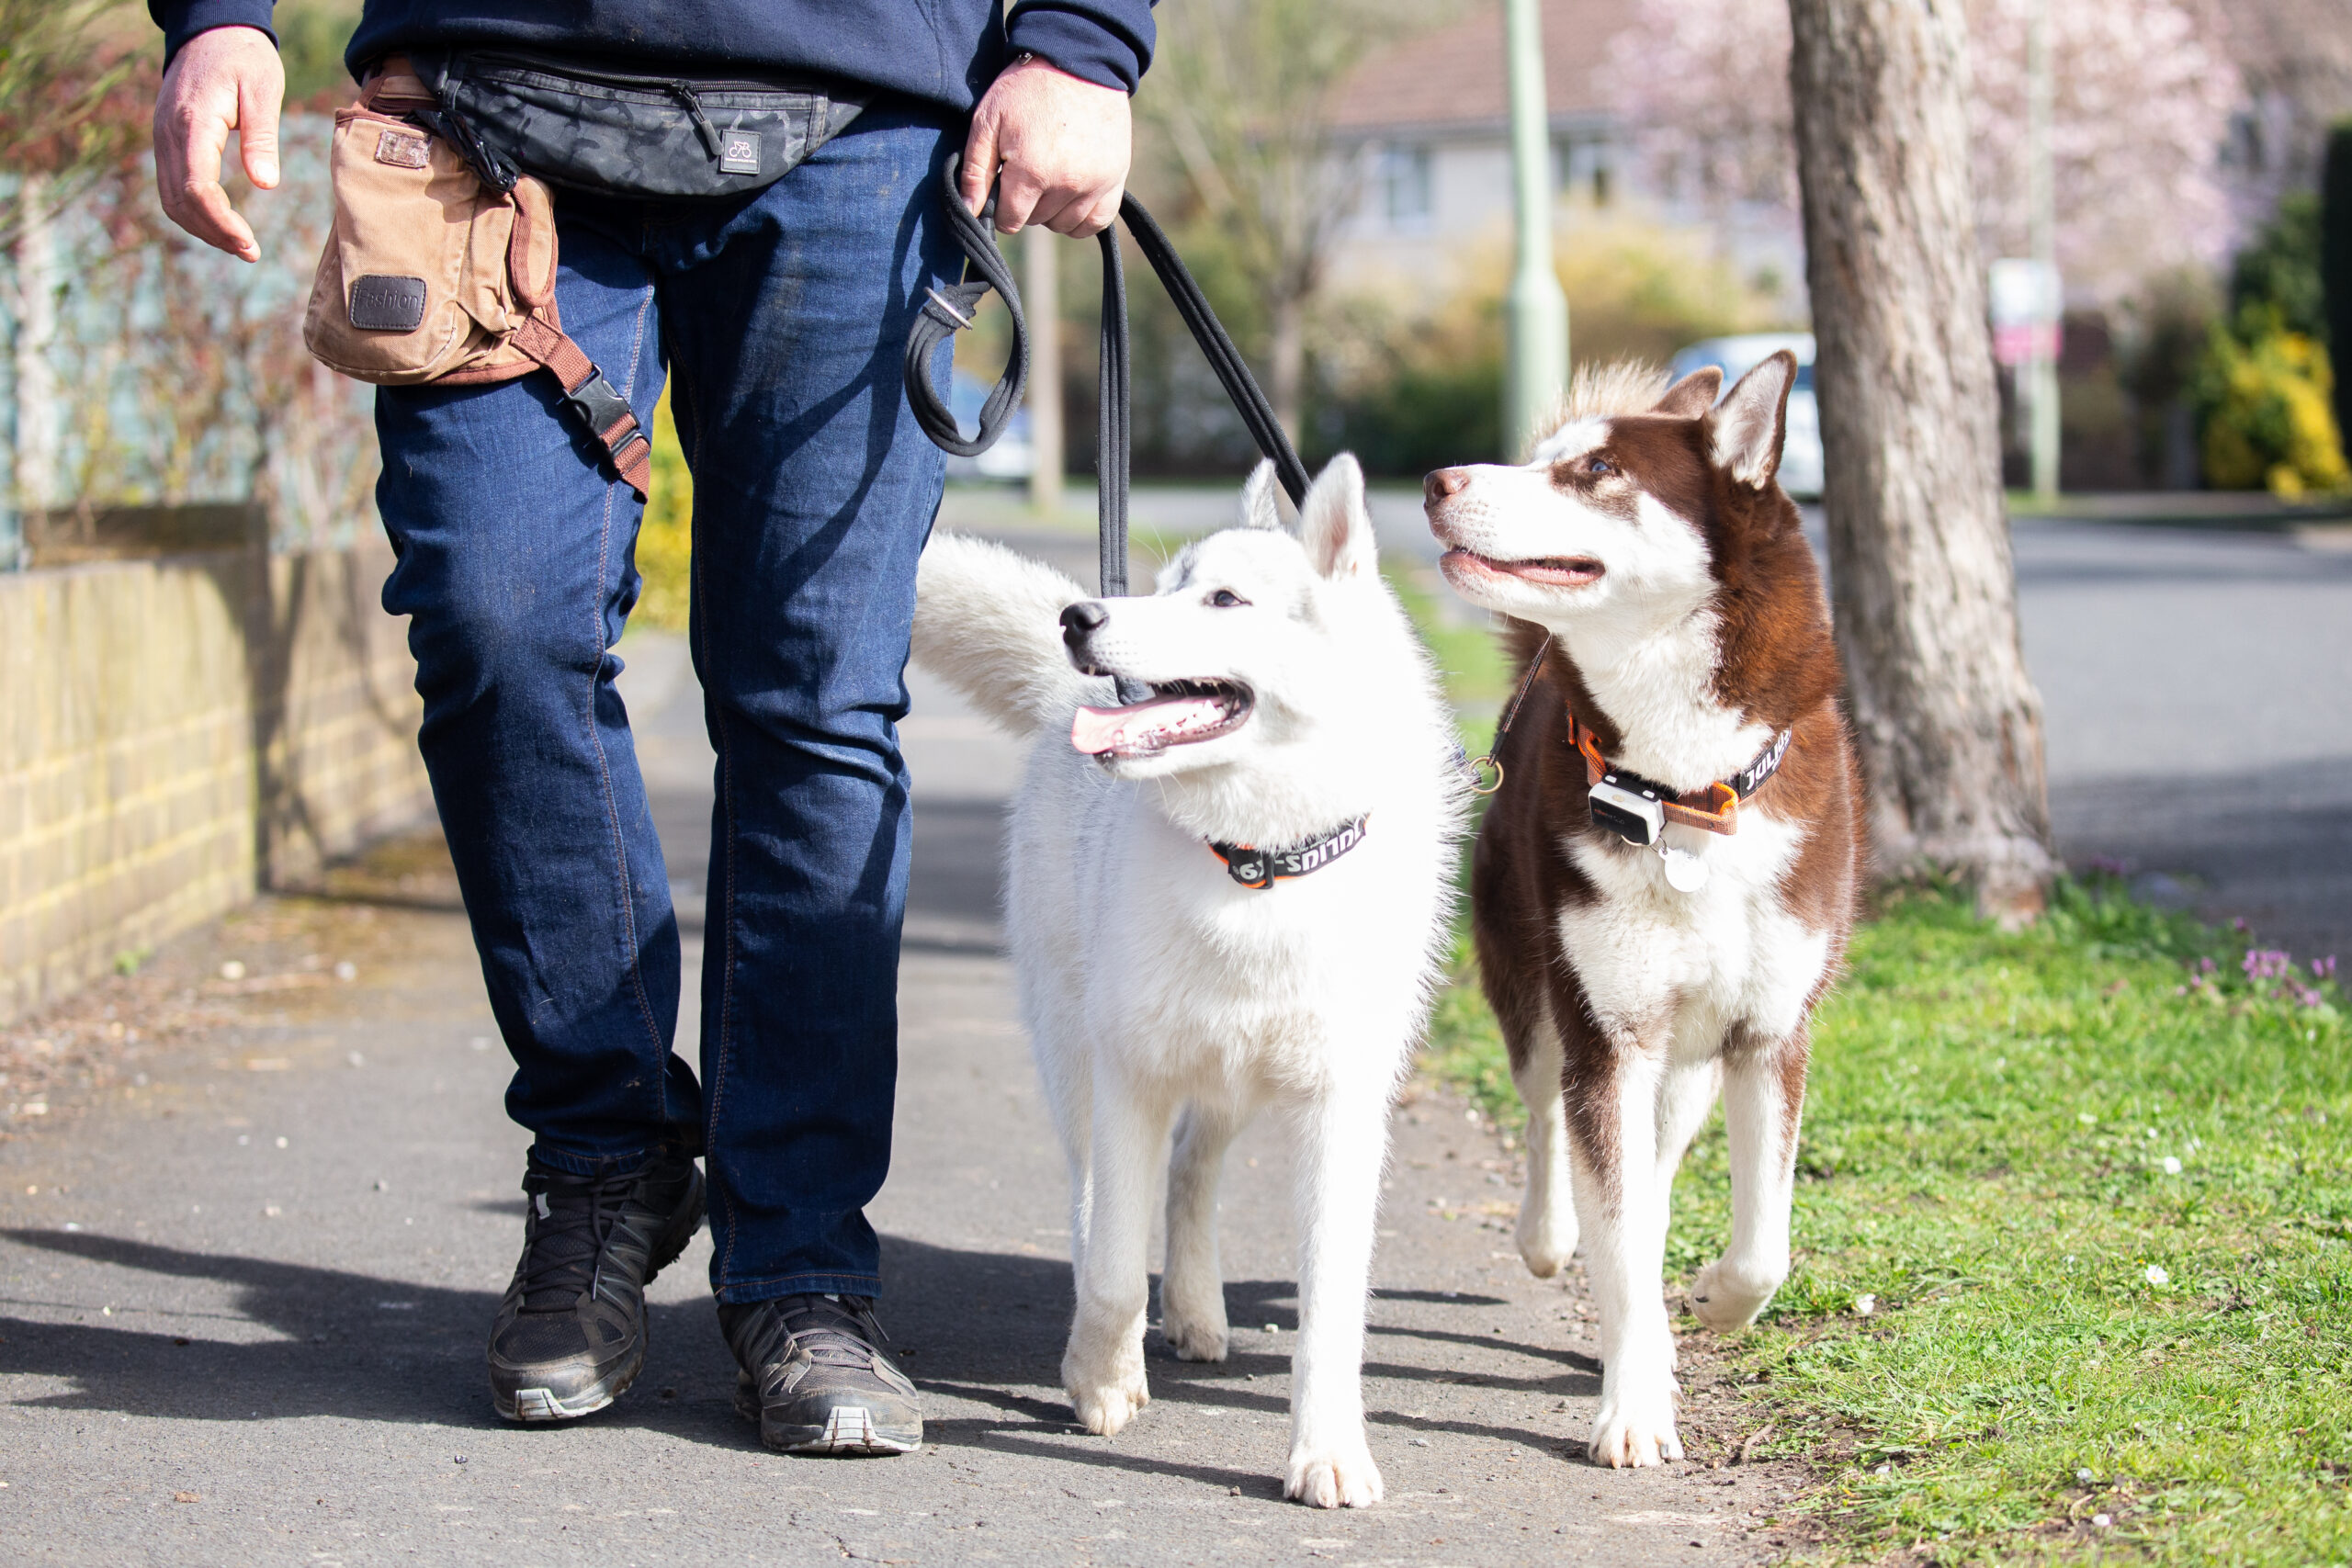 Brand-Two-attentive-dogs-in-training-Husky-scaled